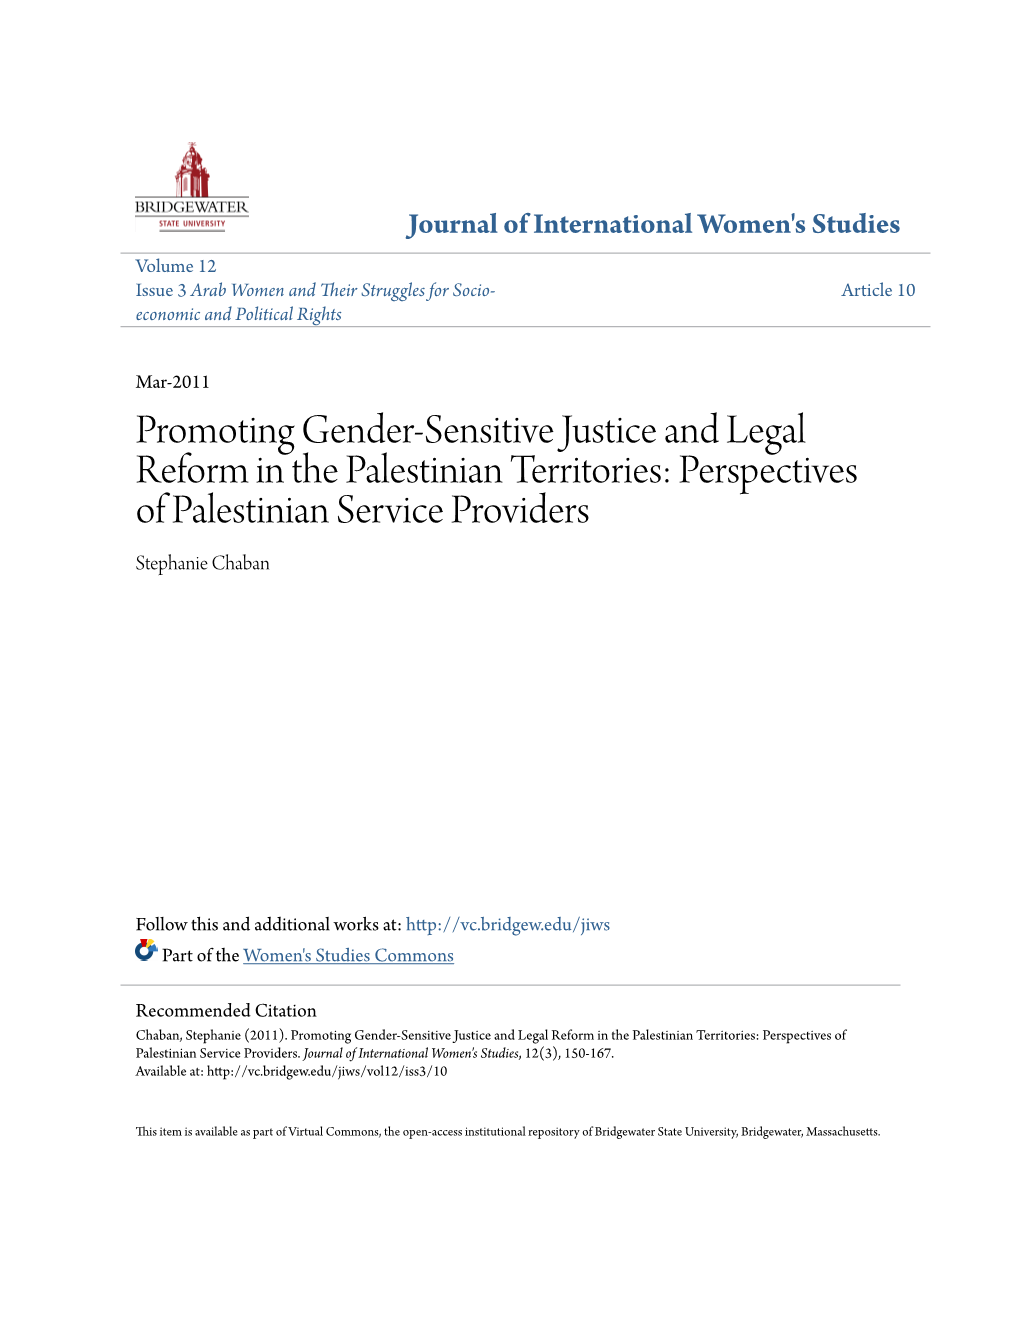 Promoting Gender-Sensitive Justice and Legal Reform in the Palestinian Territories: Perspectives of Palestinian Service Providers Stephanie Chaban